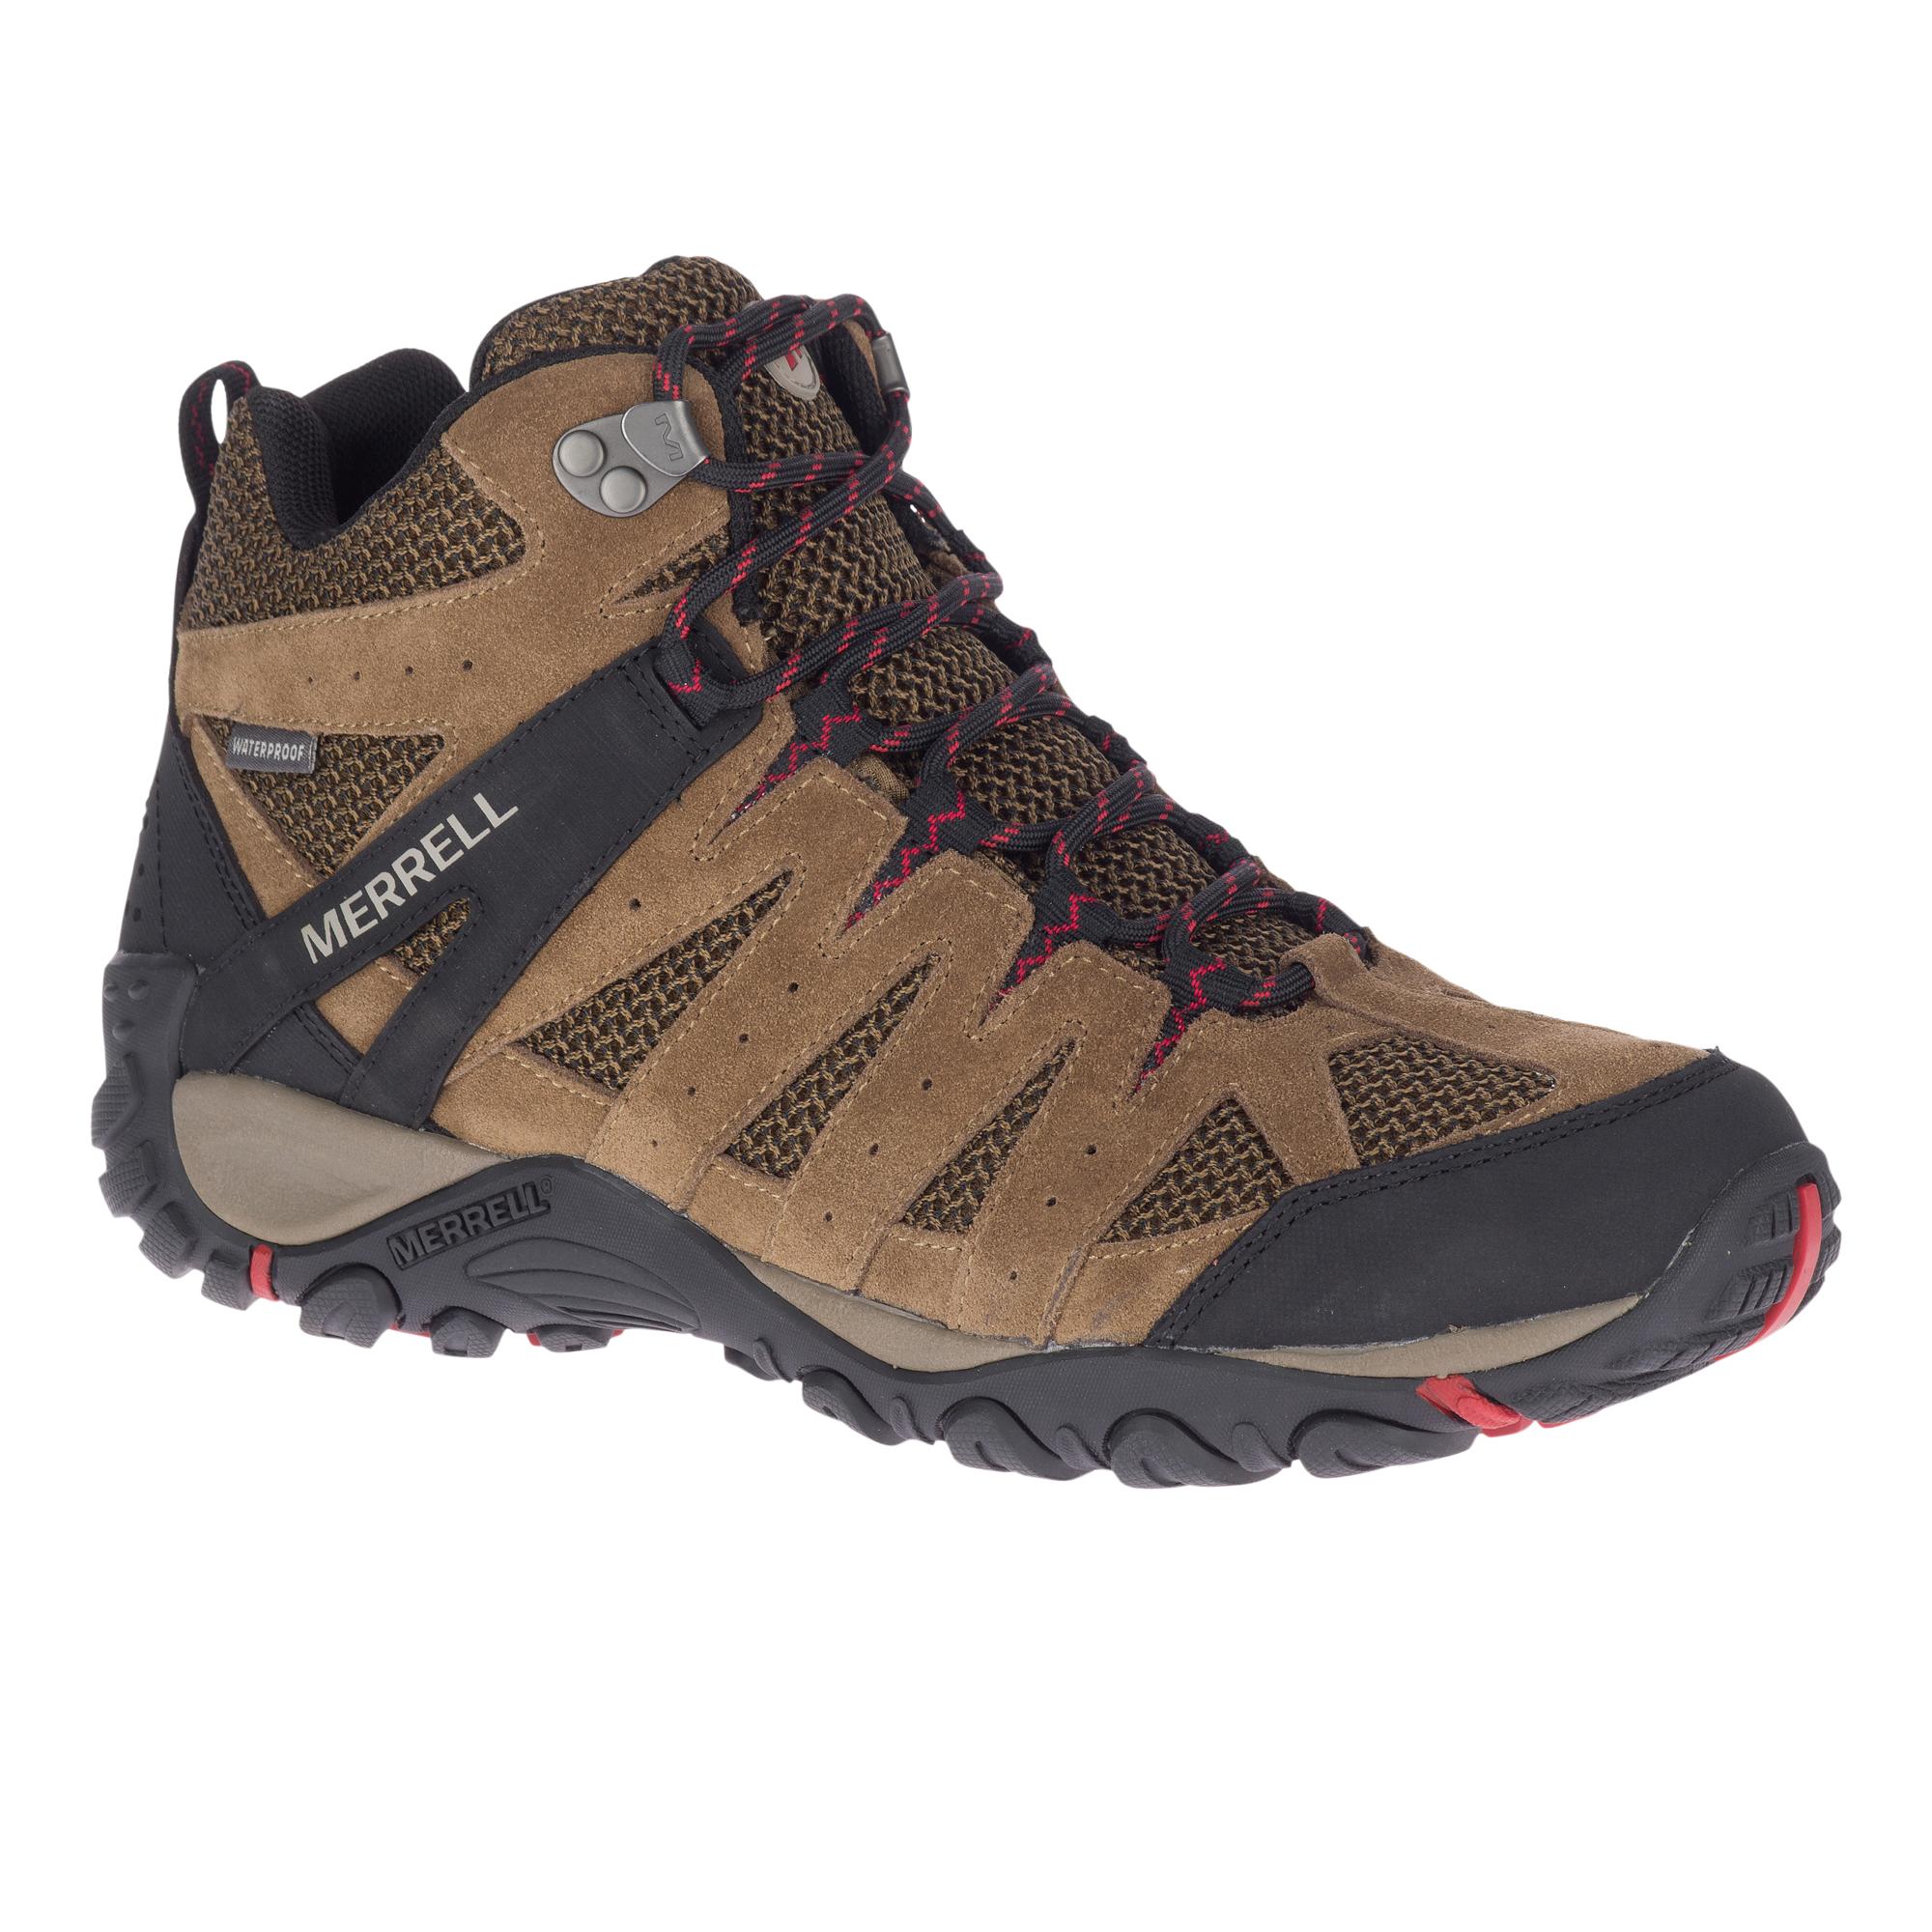 accentor 2 vent mid